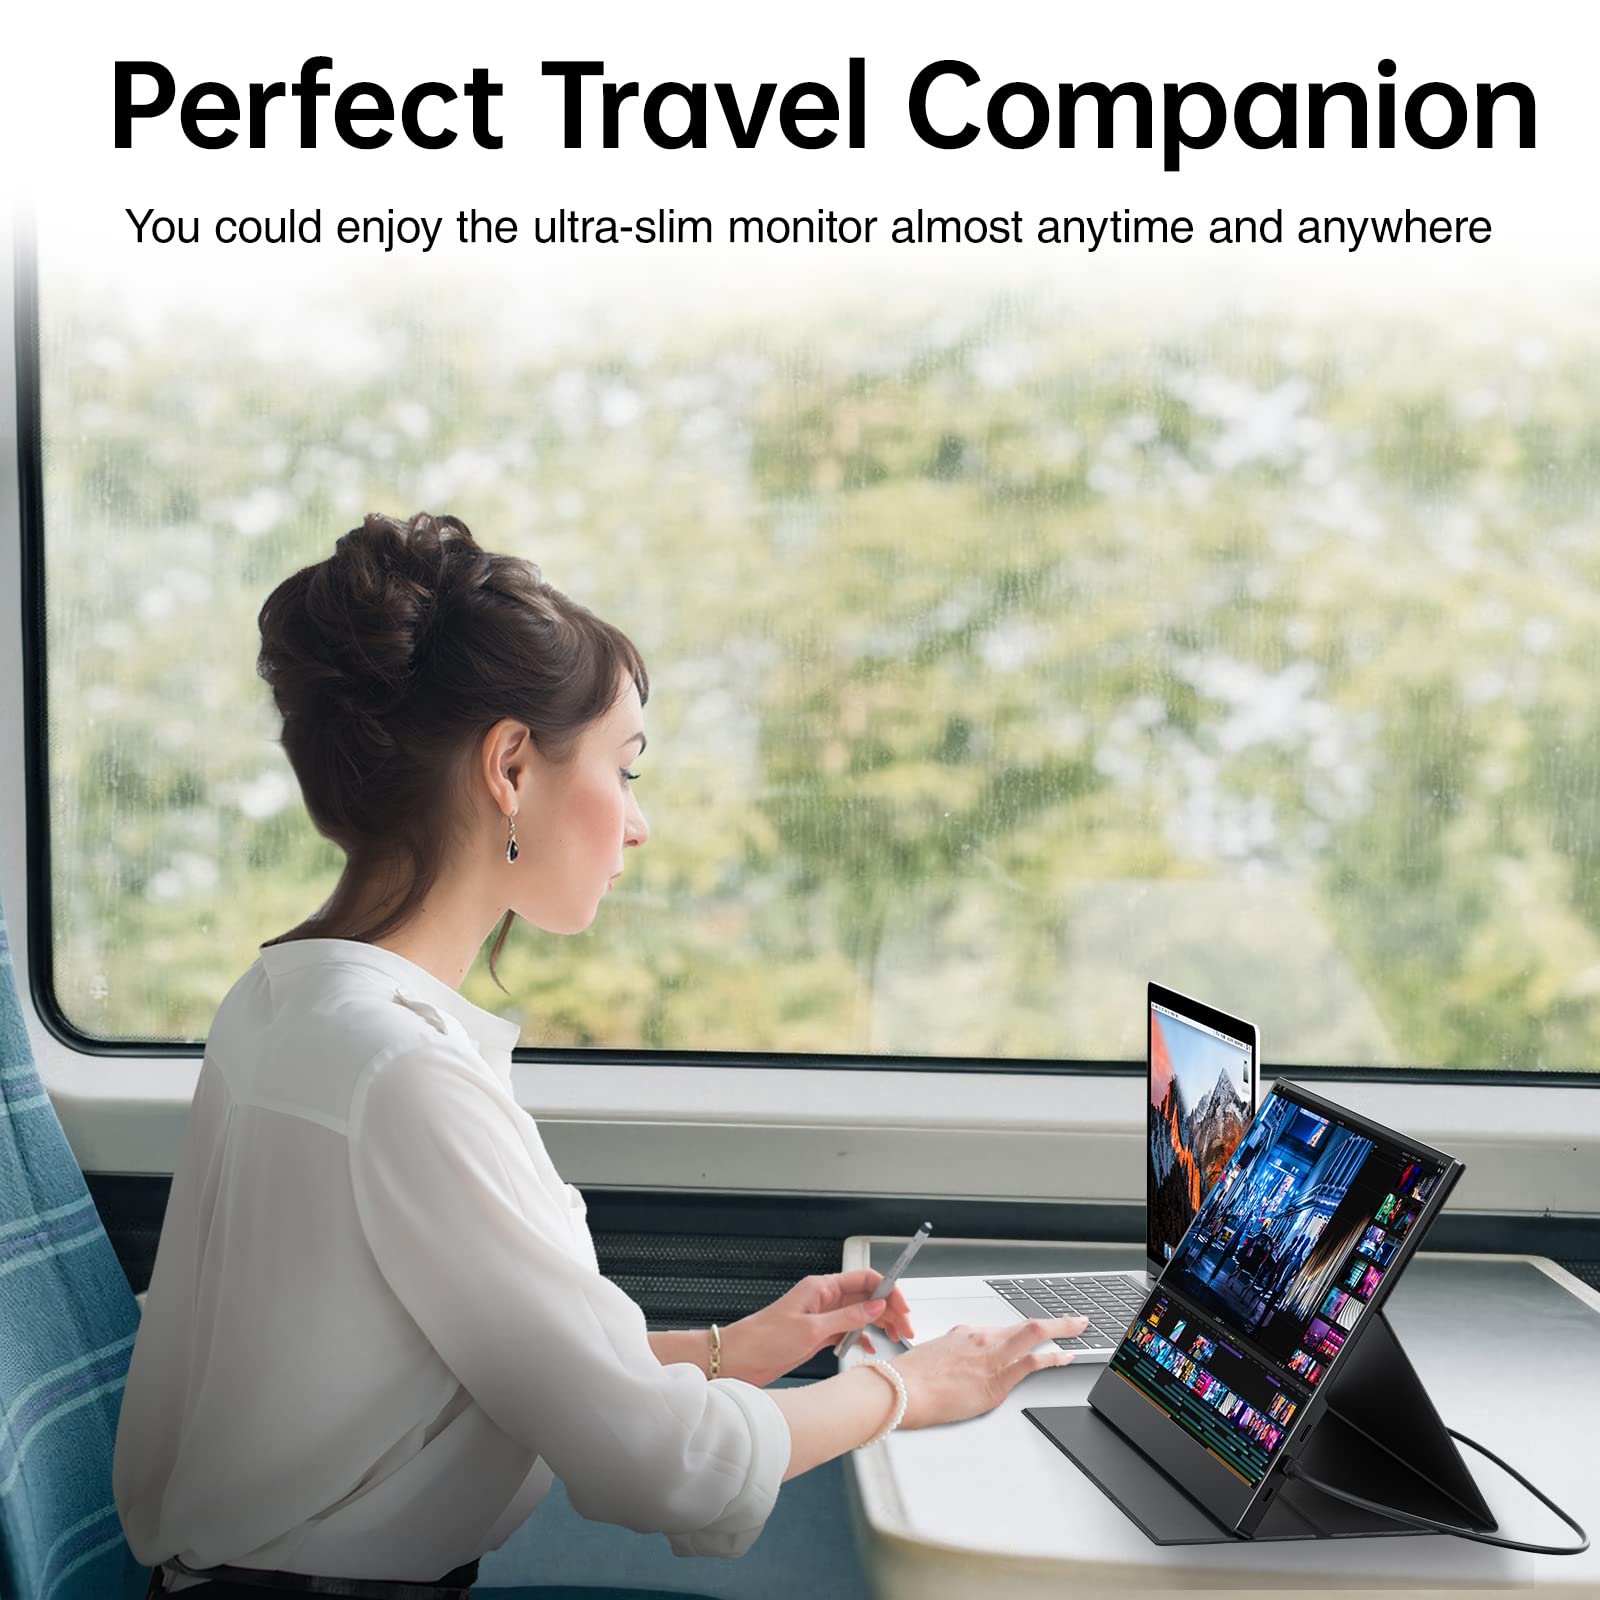 Portable Monitor-15.6 Inch Slim Computer Display Gaming Monitor Full HD 1080P USB Type-C Mini HDMI IPS Eye Care Screen with Cover for Travel Laptop MacBook Surface PC PS4/PS5 Xbox MAC VESA Mountable